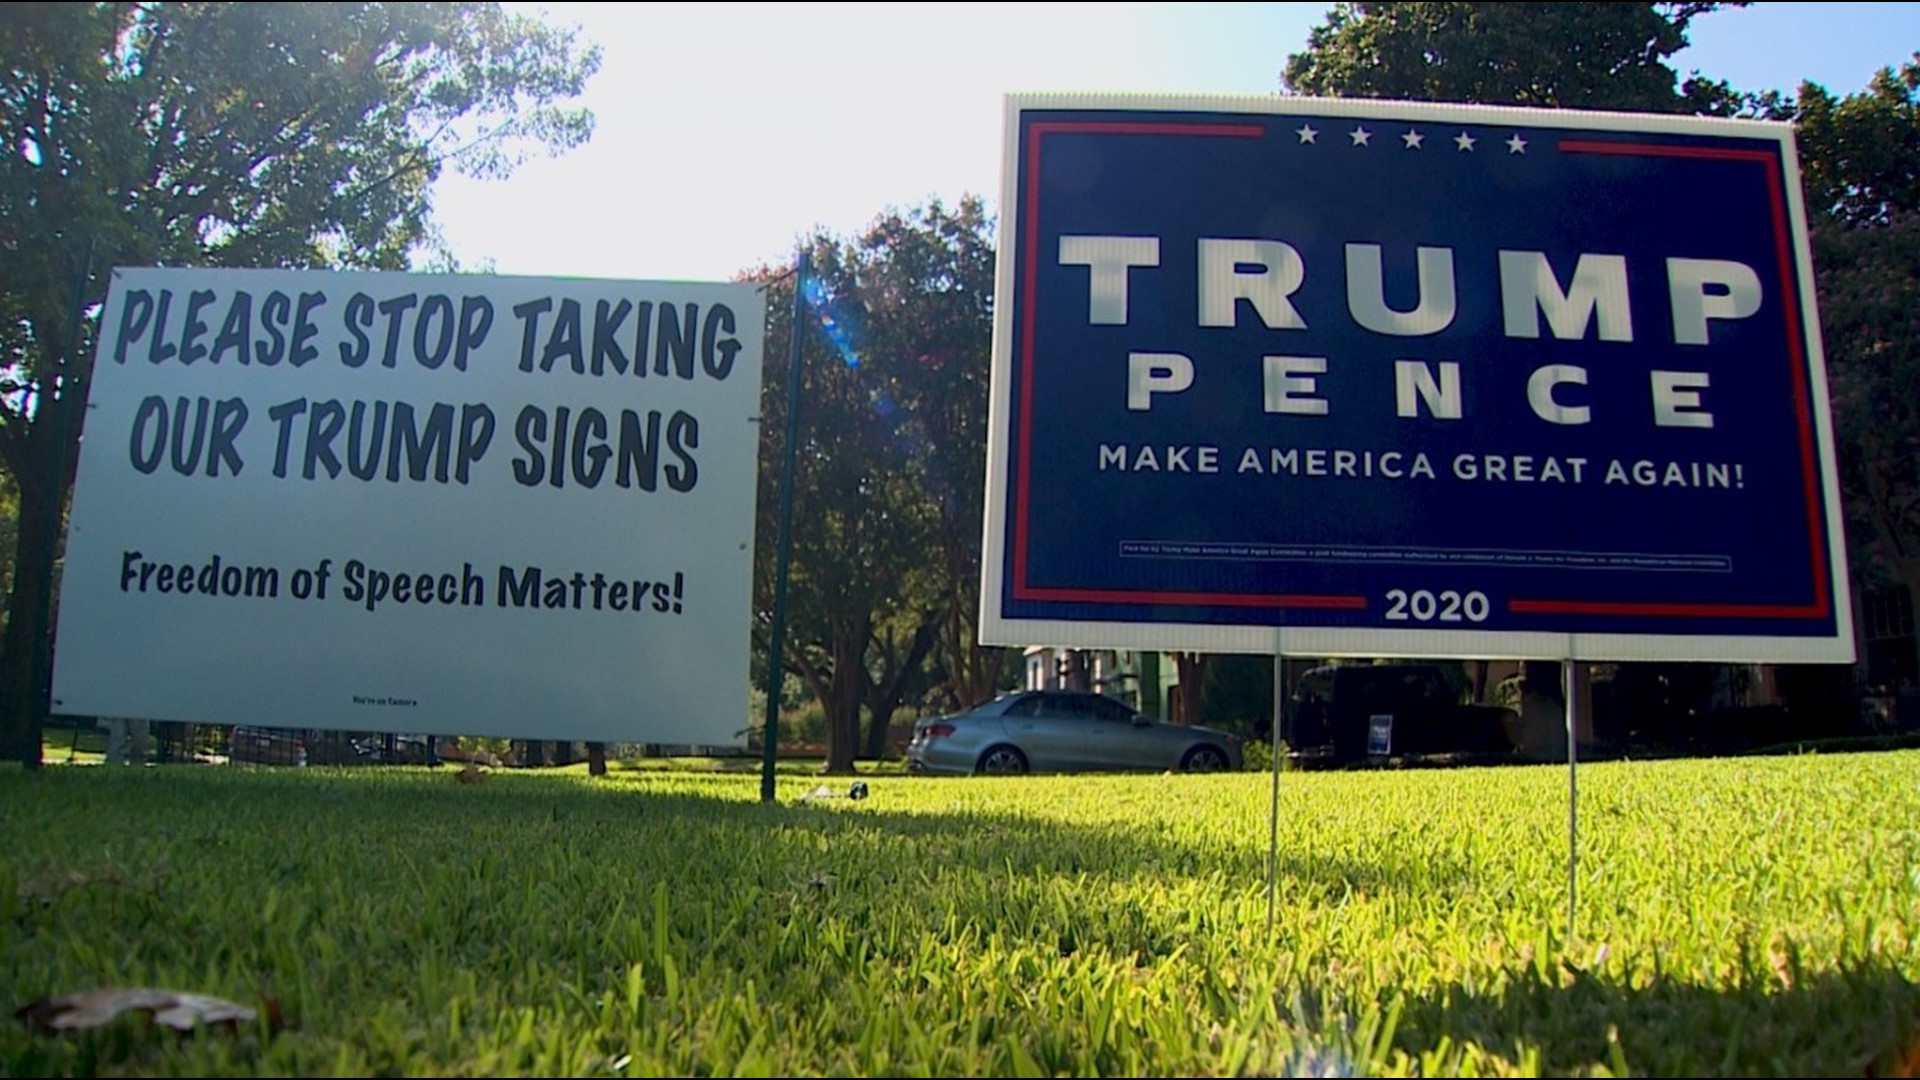 Jim Turner now made a new sign with a simple message: "Please stop taking our Trump signs – Freedom of Speech Matters."